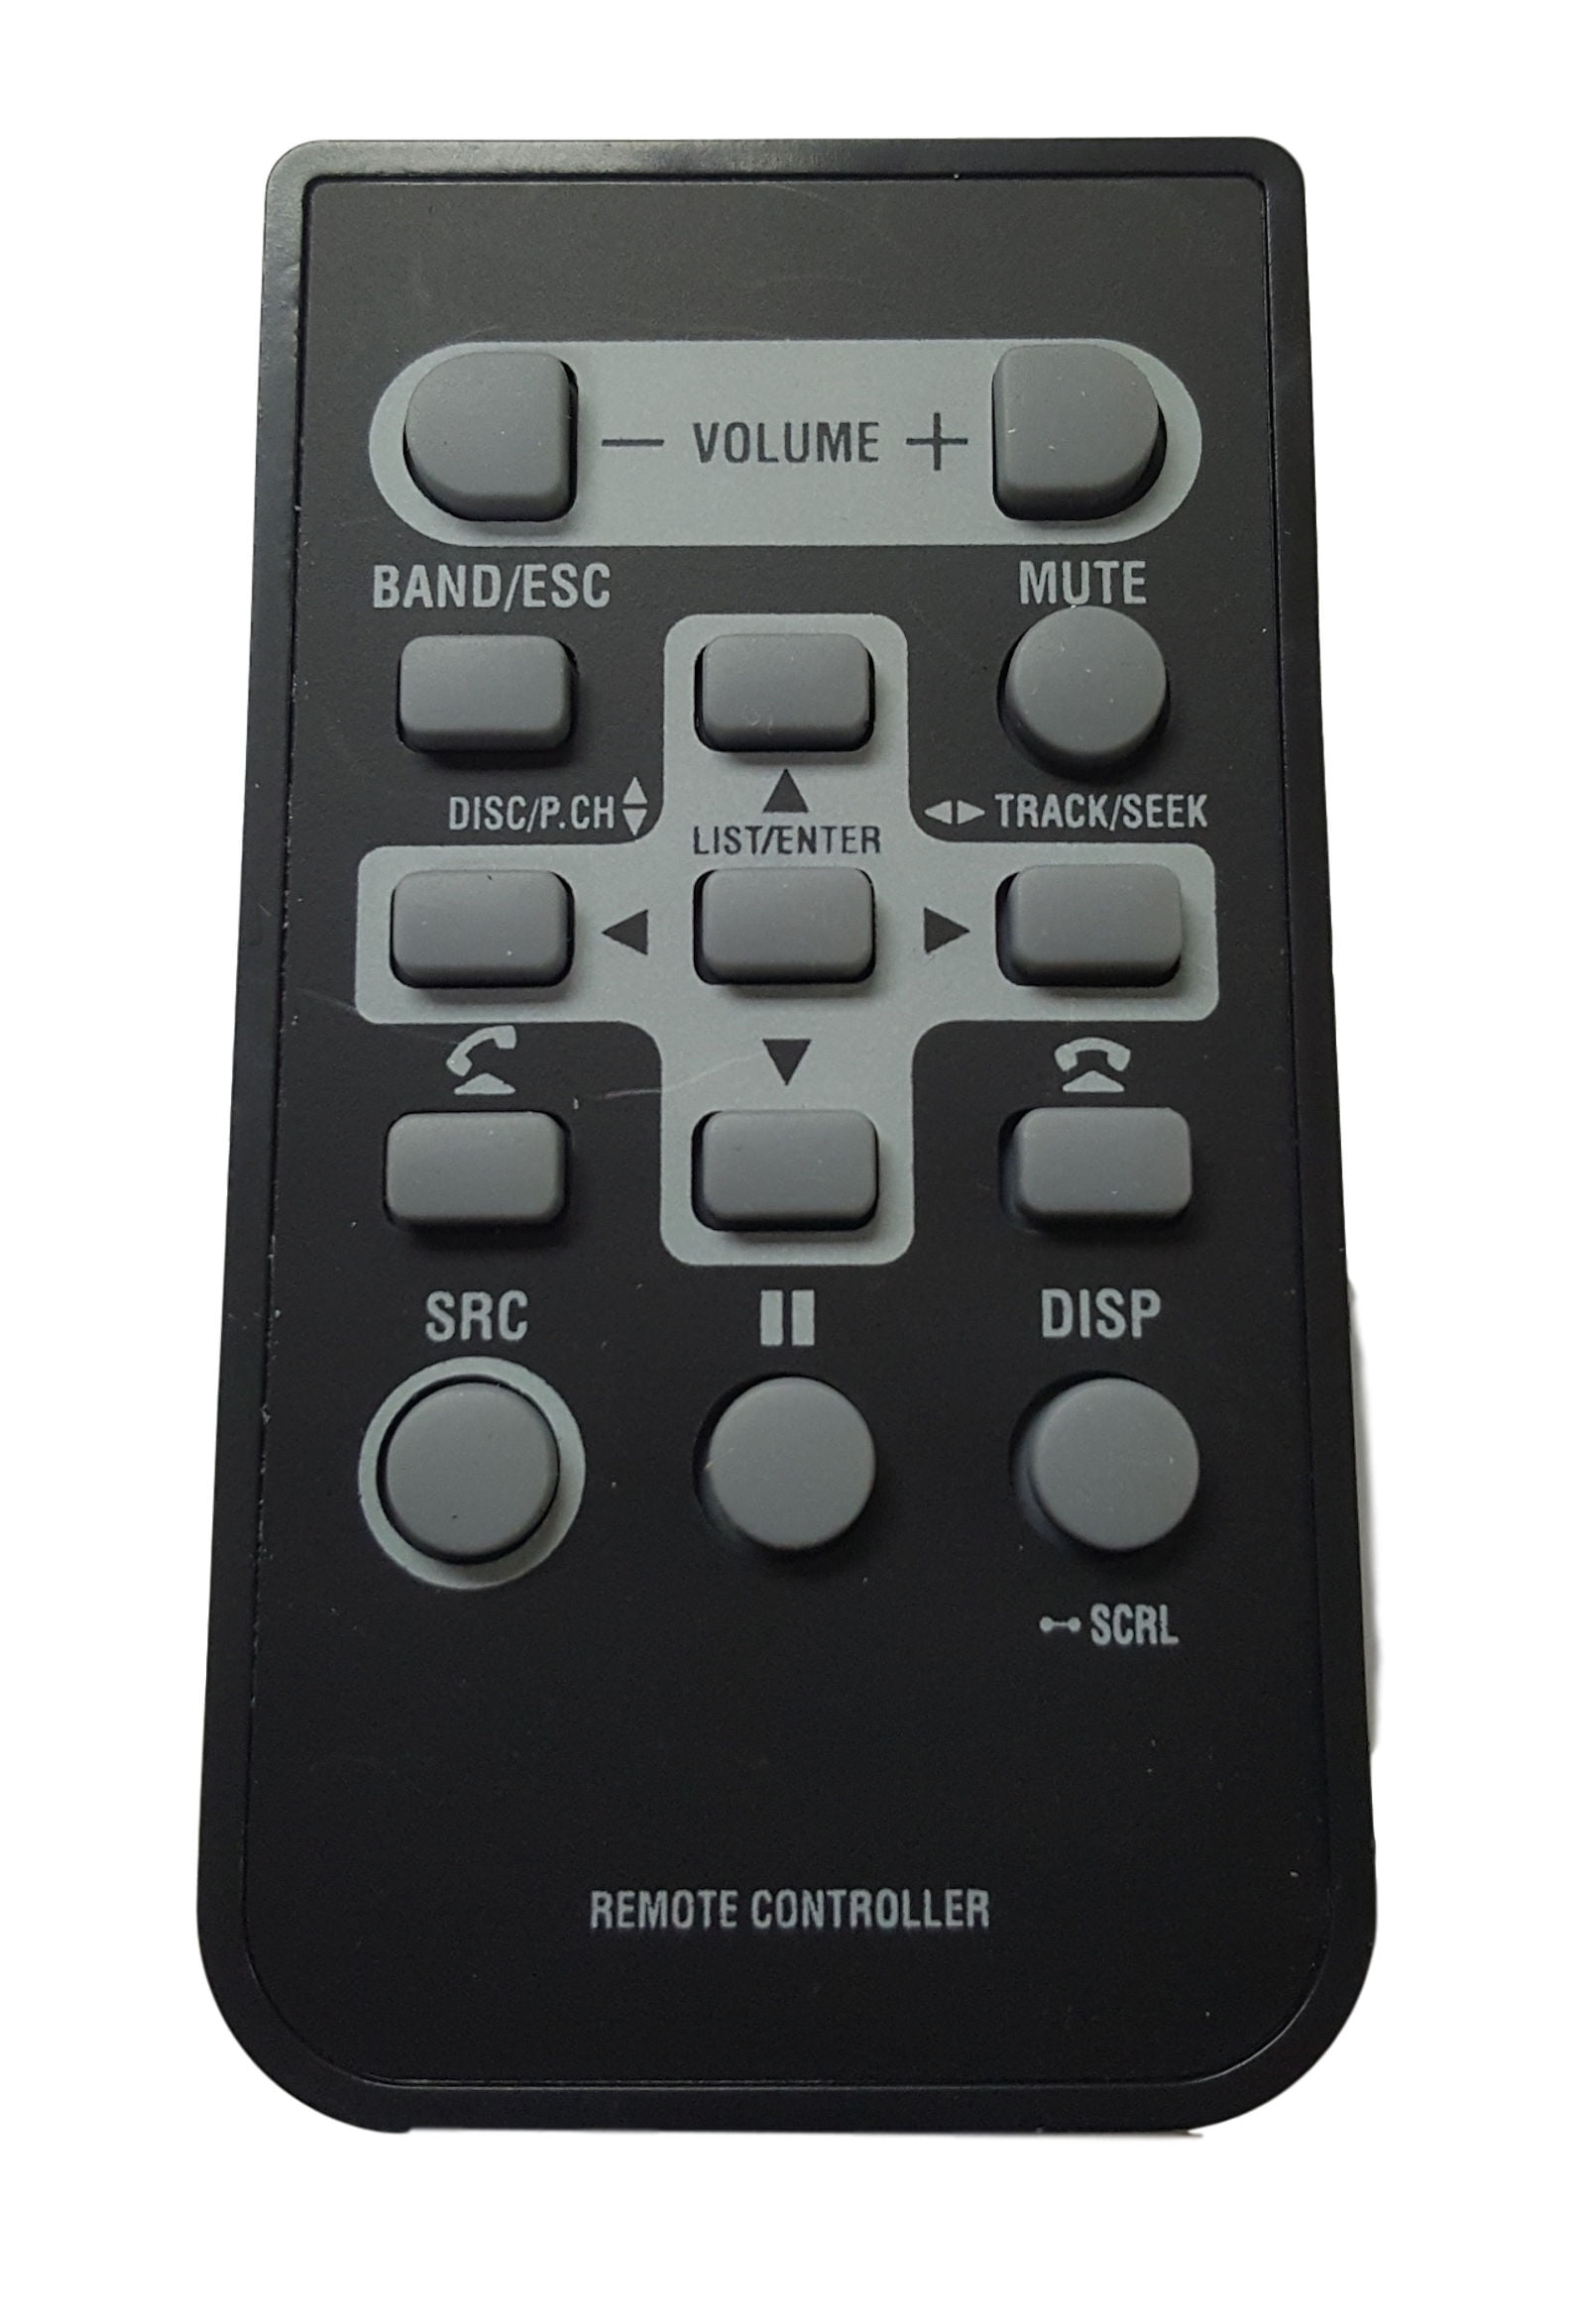 NEW AUTO STEREO REMOTE CONTROL for PIONEER DEH-X6600BS Player 